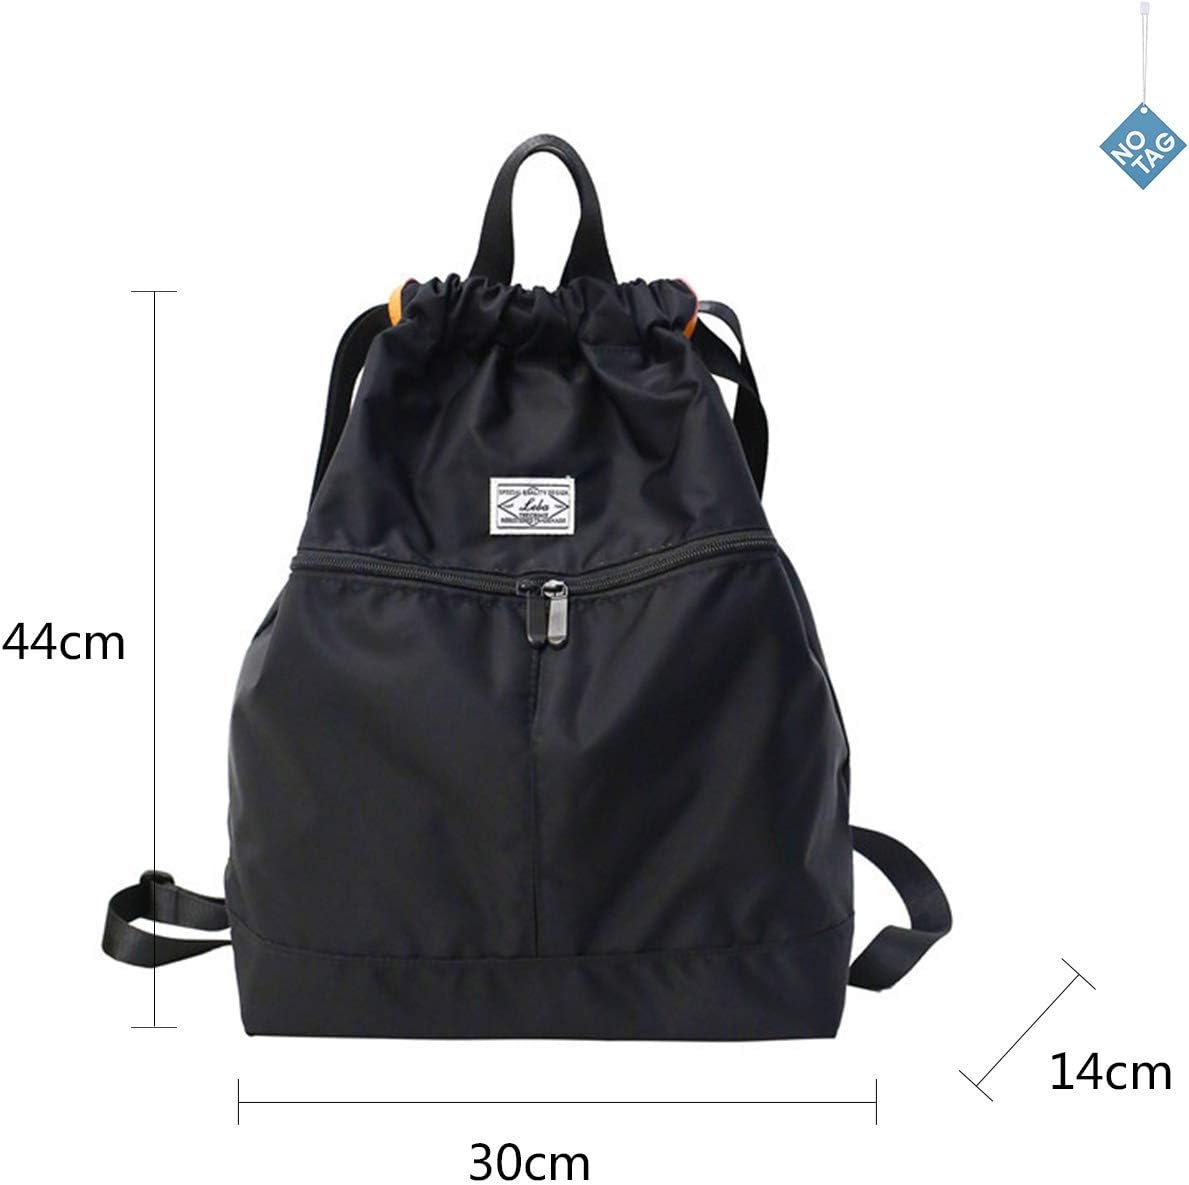 Knapsack, Gym Backpack, Large Capacity, Nylon, Pool Bag, Waterproof, Sports Bag, Lightweight, Multi-functional, Drawstring Bag, Sports, Swimming, Wide Shoulder Straps, Club Use, School Trips, Outdoors, Excursions, School, Unisex